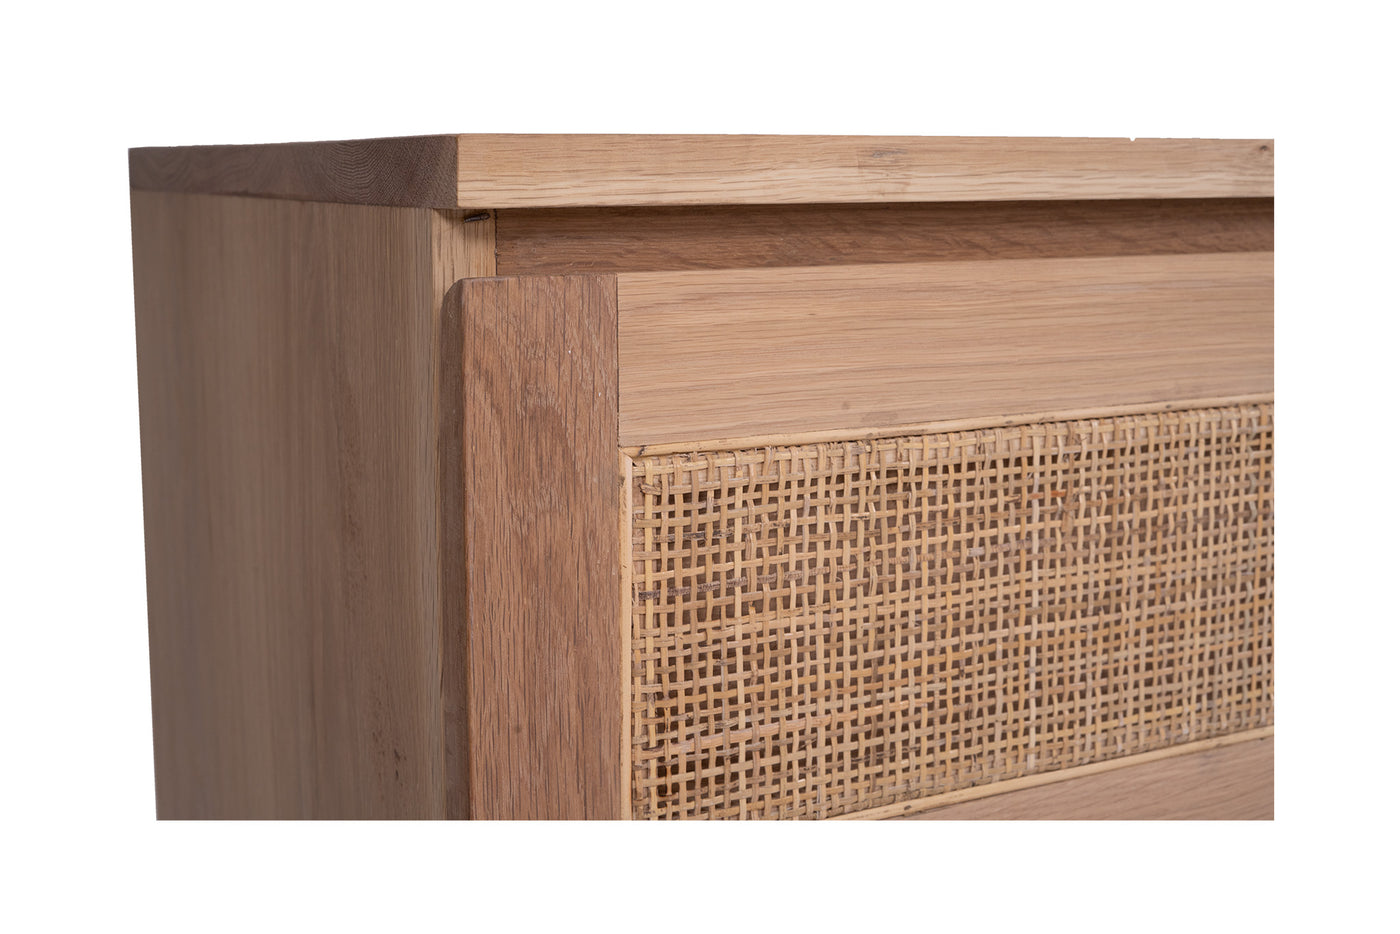 Tom Chest Of Drawers - 6 Drawers